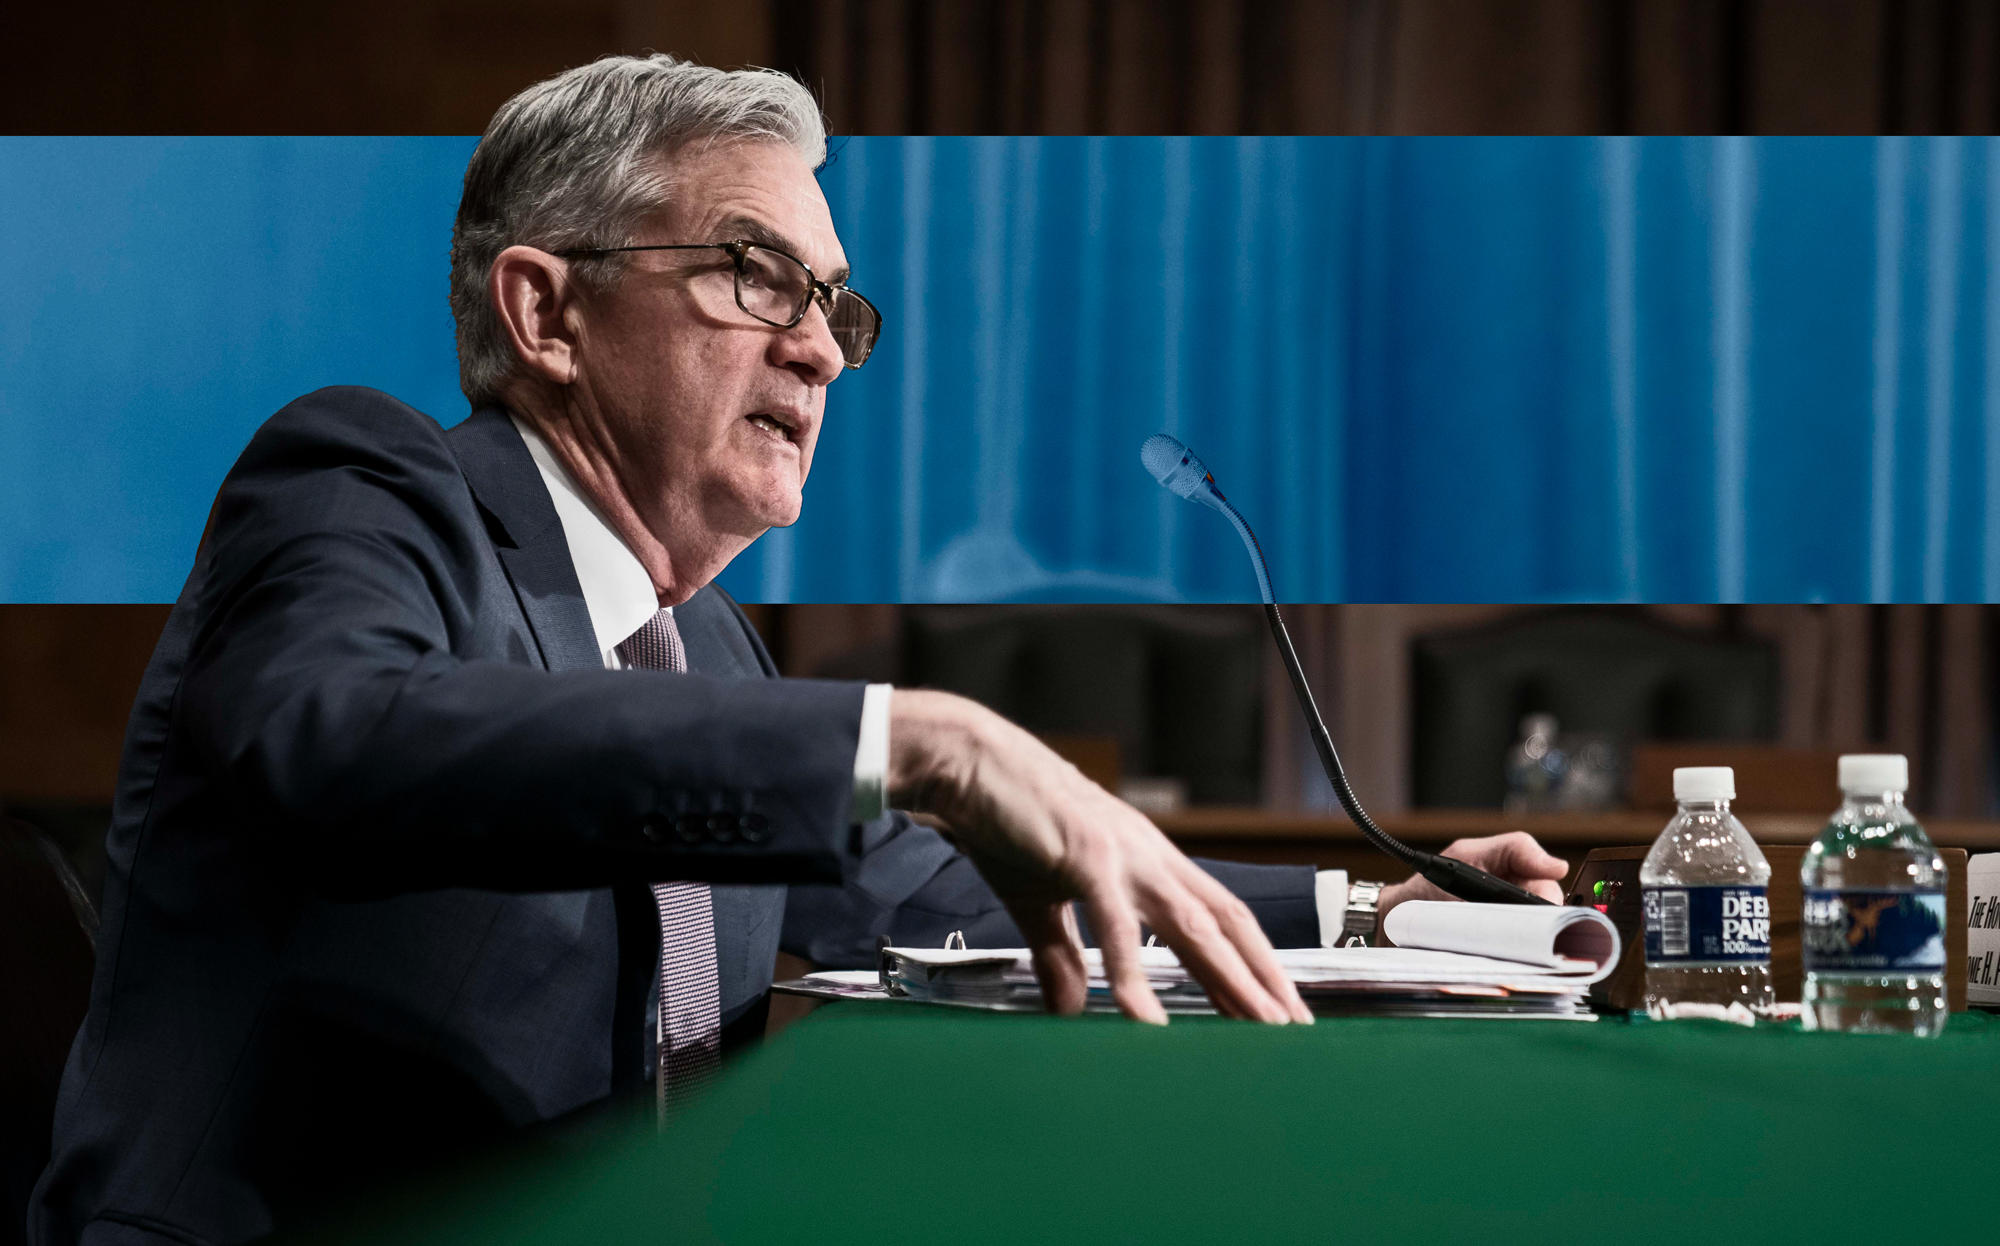 Federal Reserve Chairman Jerome Powell (Photo by Sarah Silbiger/Getty Images)